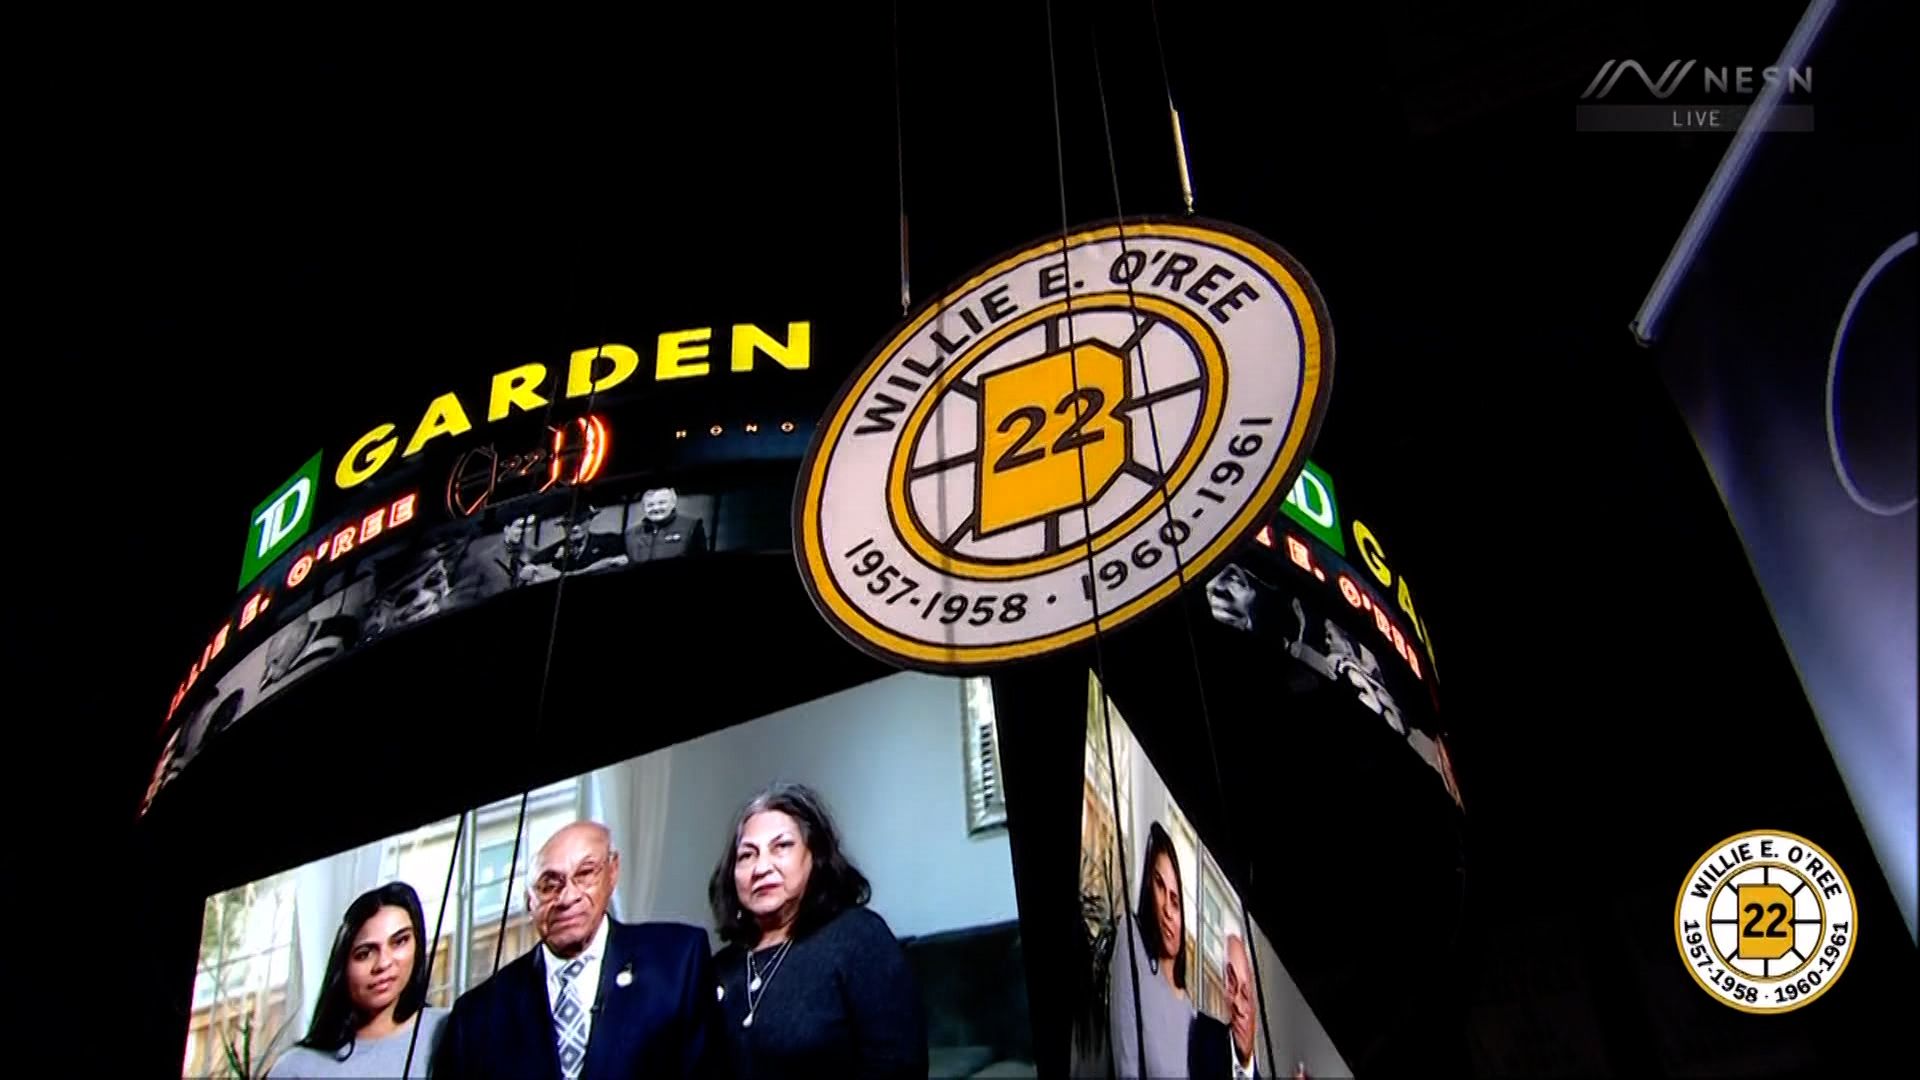 Bruins retiring number of Willie O'Ree, NHL's first Black player